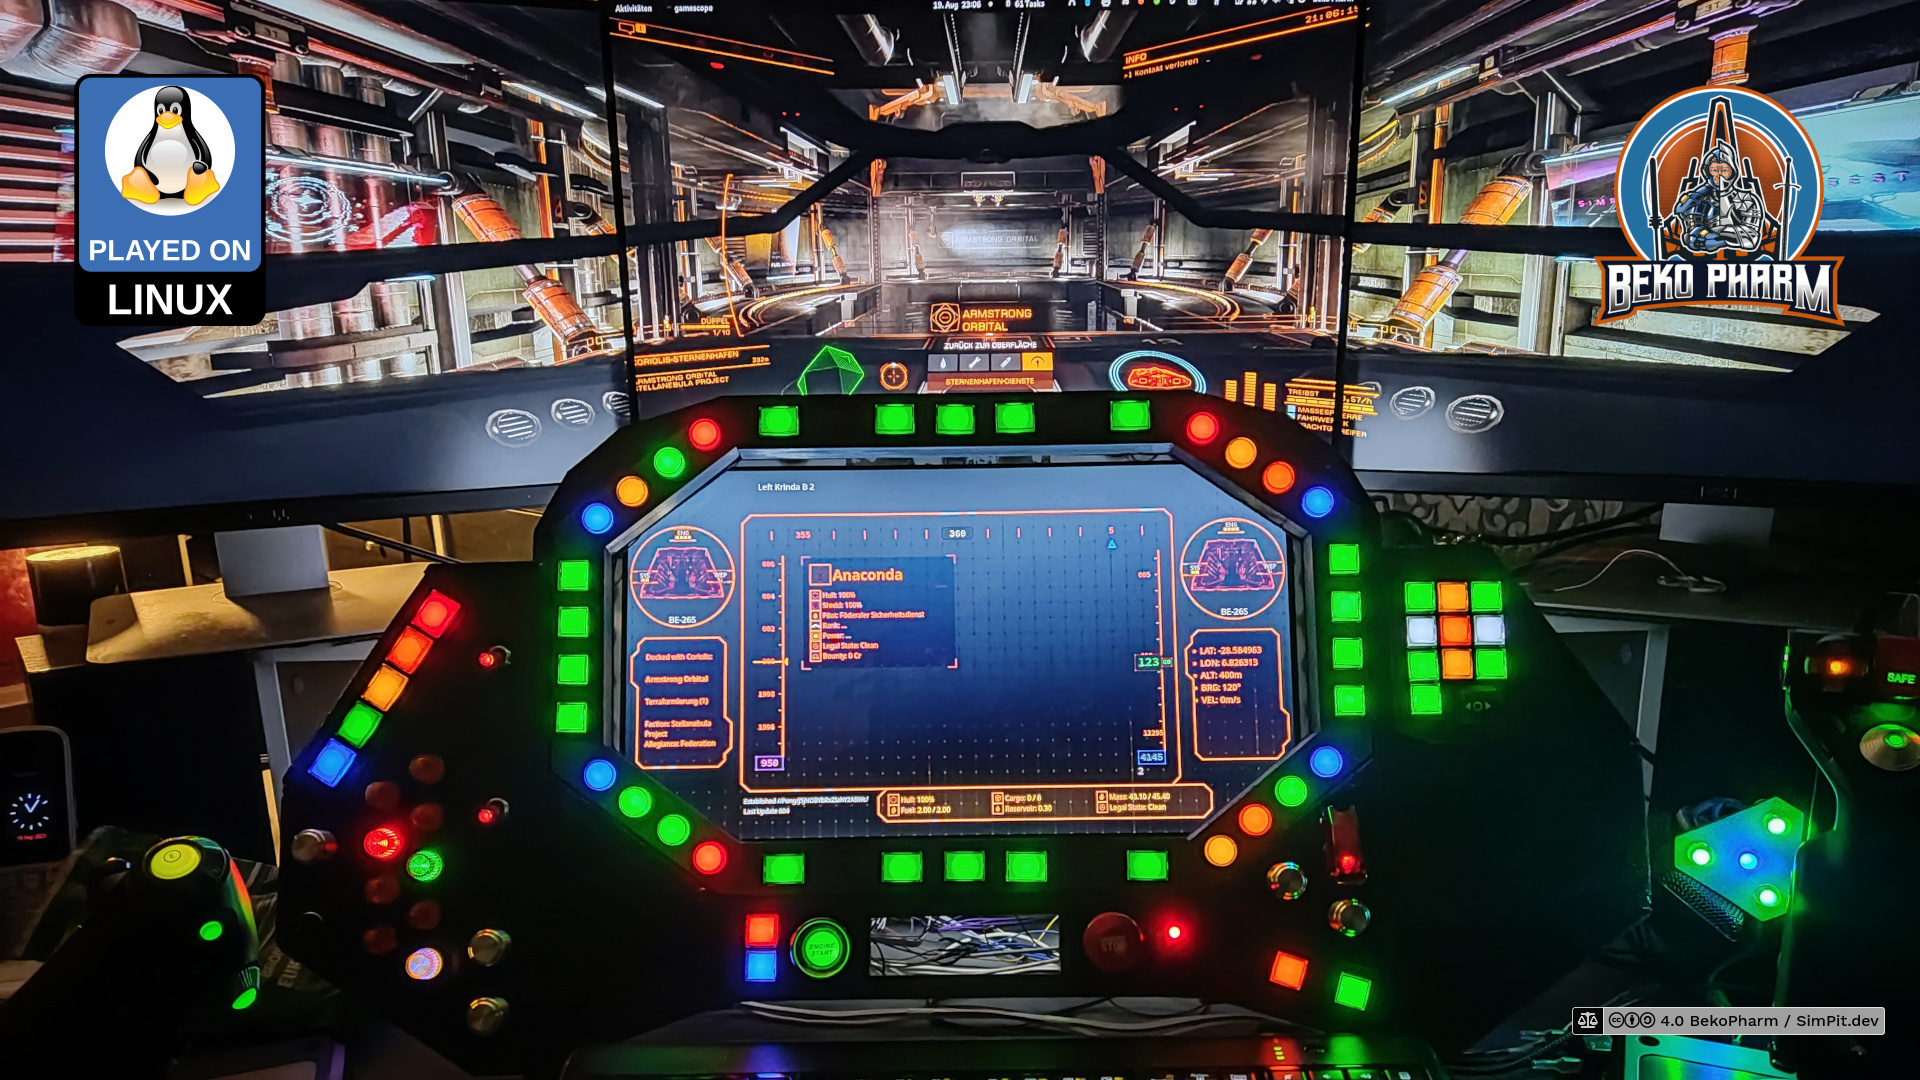 Three monitors form a wall around a box that embeds a fourth monitor, many buttons and switches in various colours are also implemented. Some LED display the status of a spaceship. The computer game that is played with this contraption is Elite Dangerous Odyssey